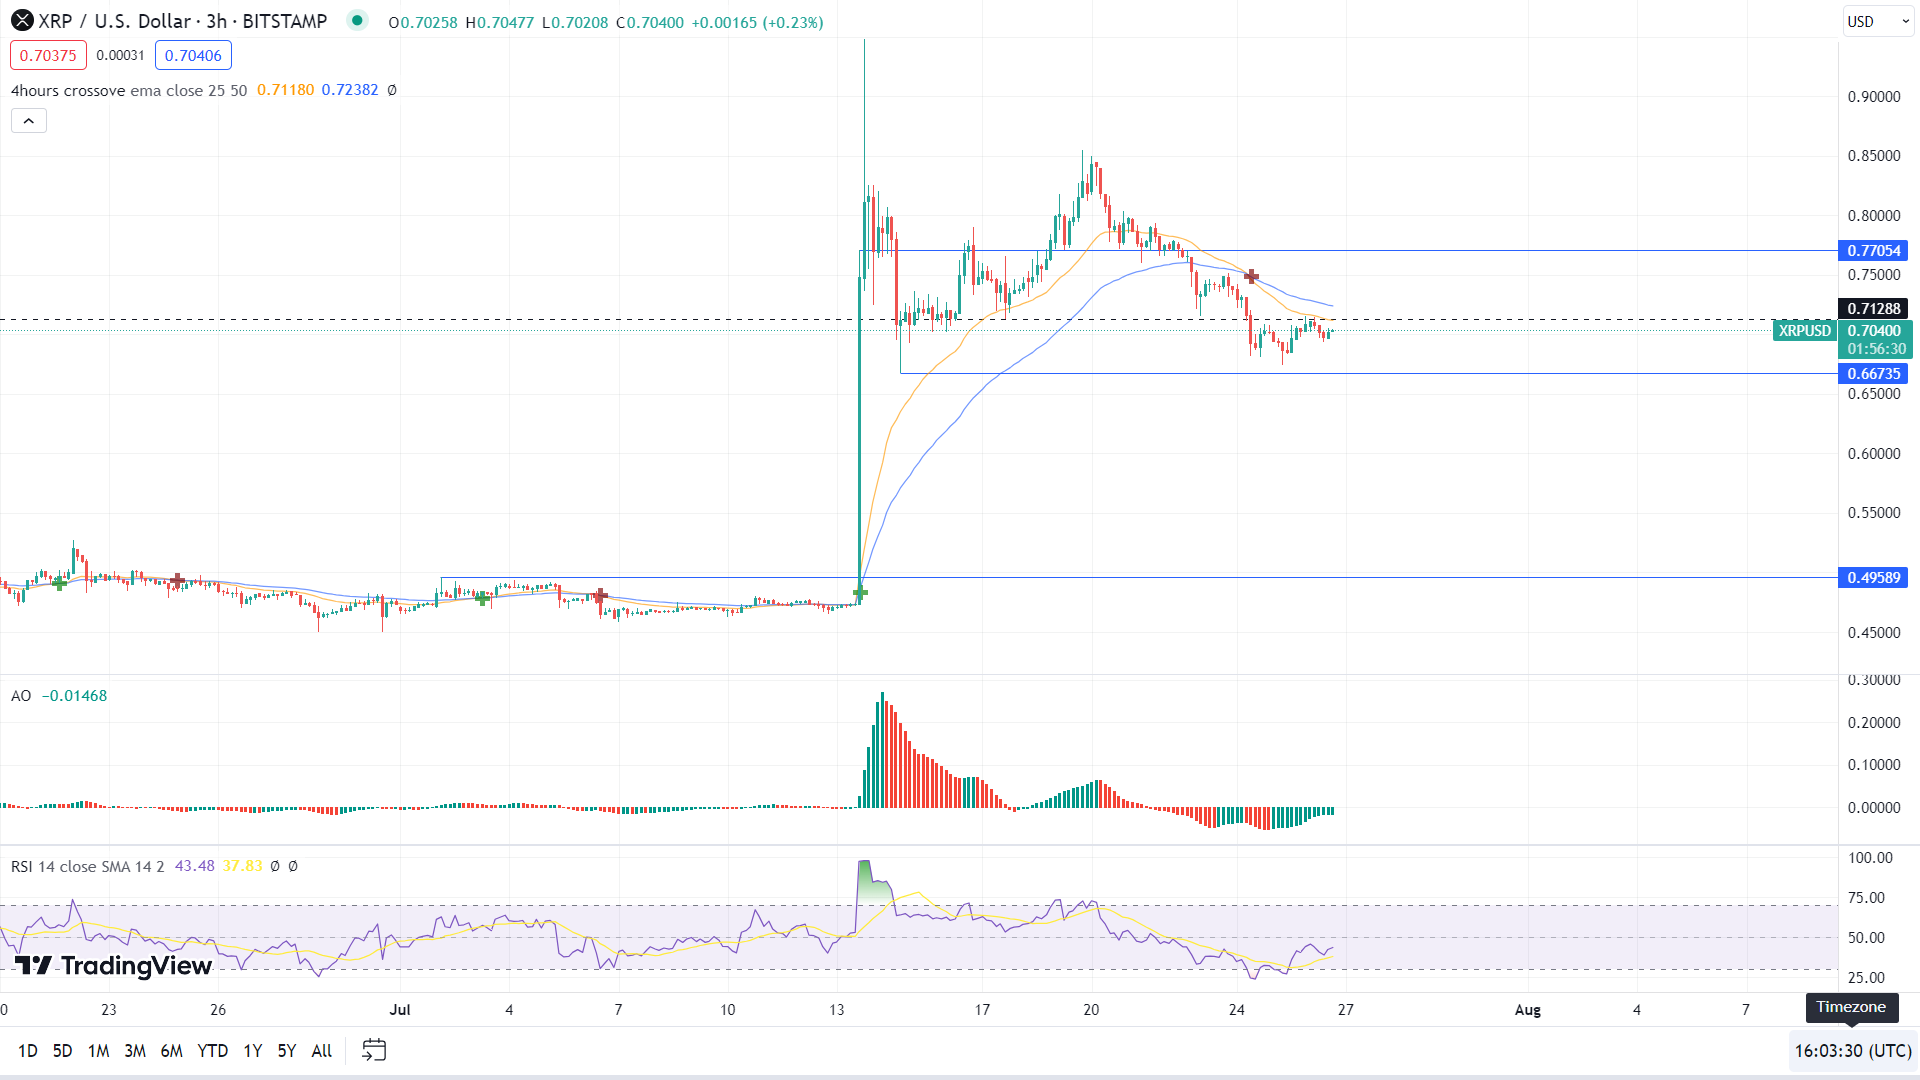 XRP/USD 3-hour chart